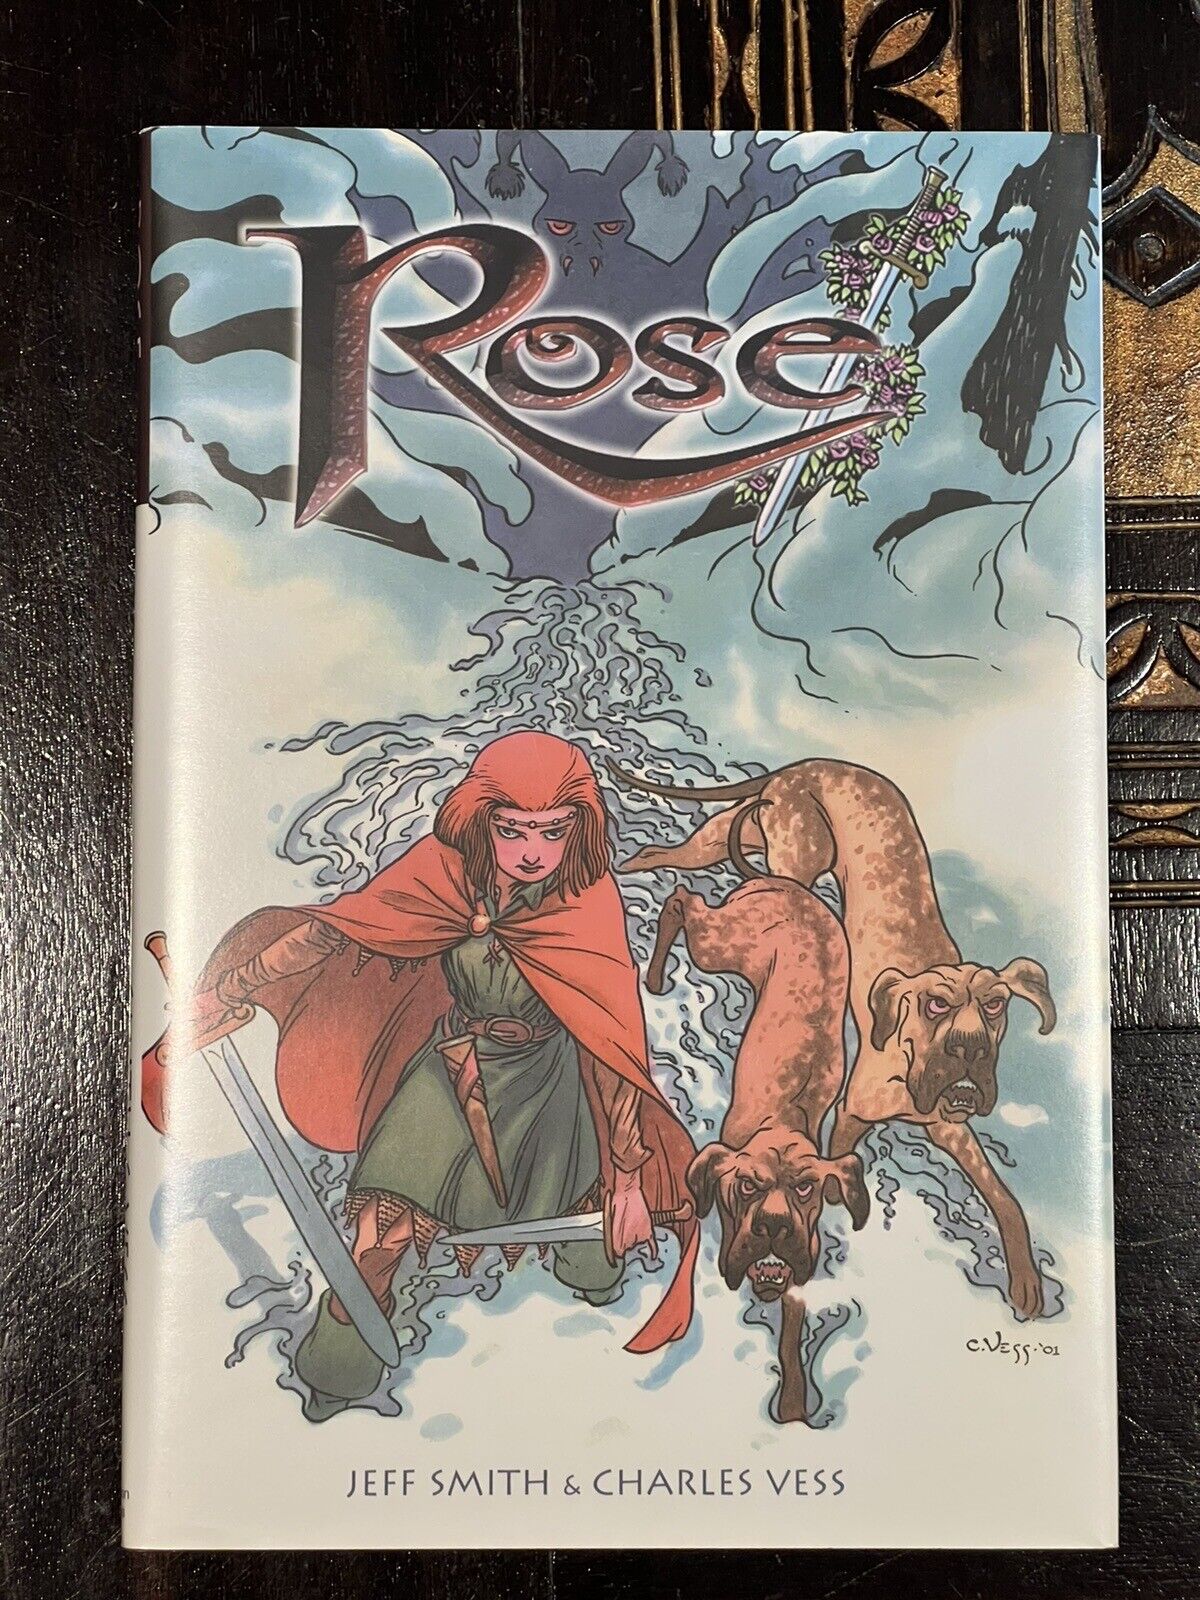 ROSE HC Signed by Jeff Smith with Sketch